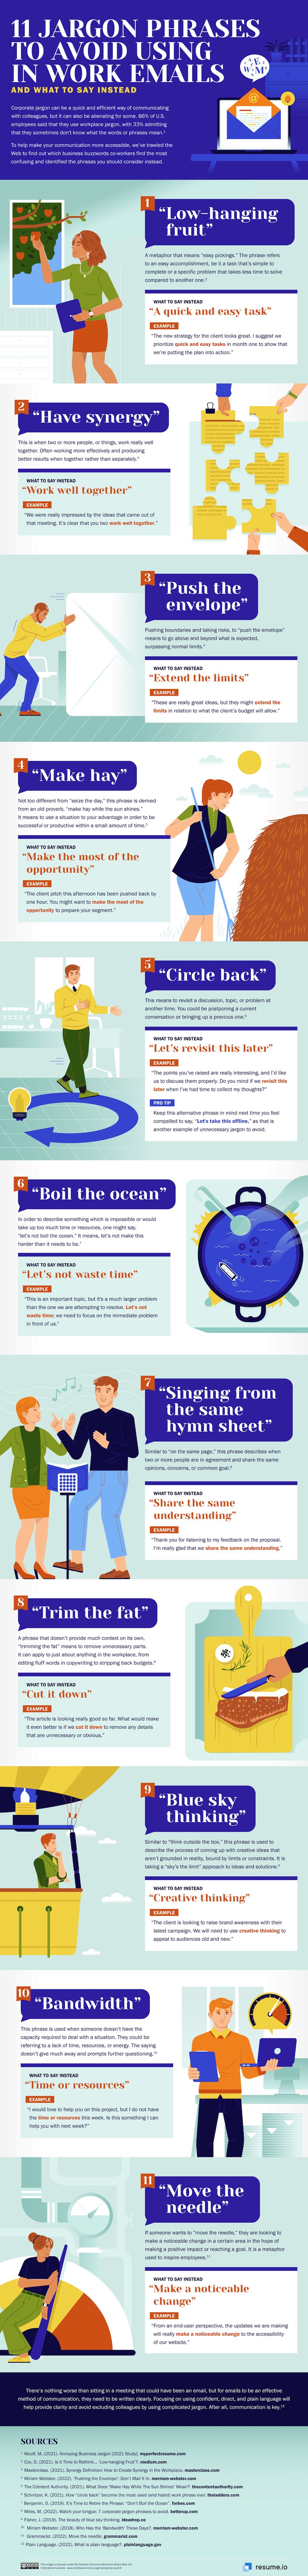 11 jargon phrases to avoid using in work emails infographic